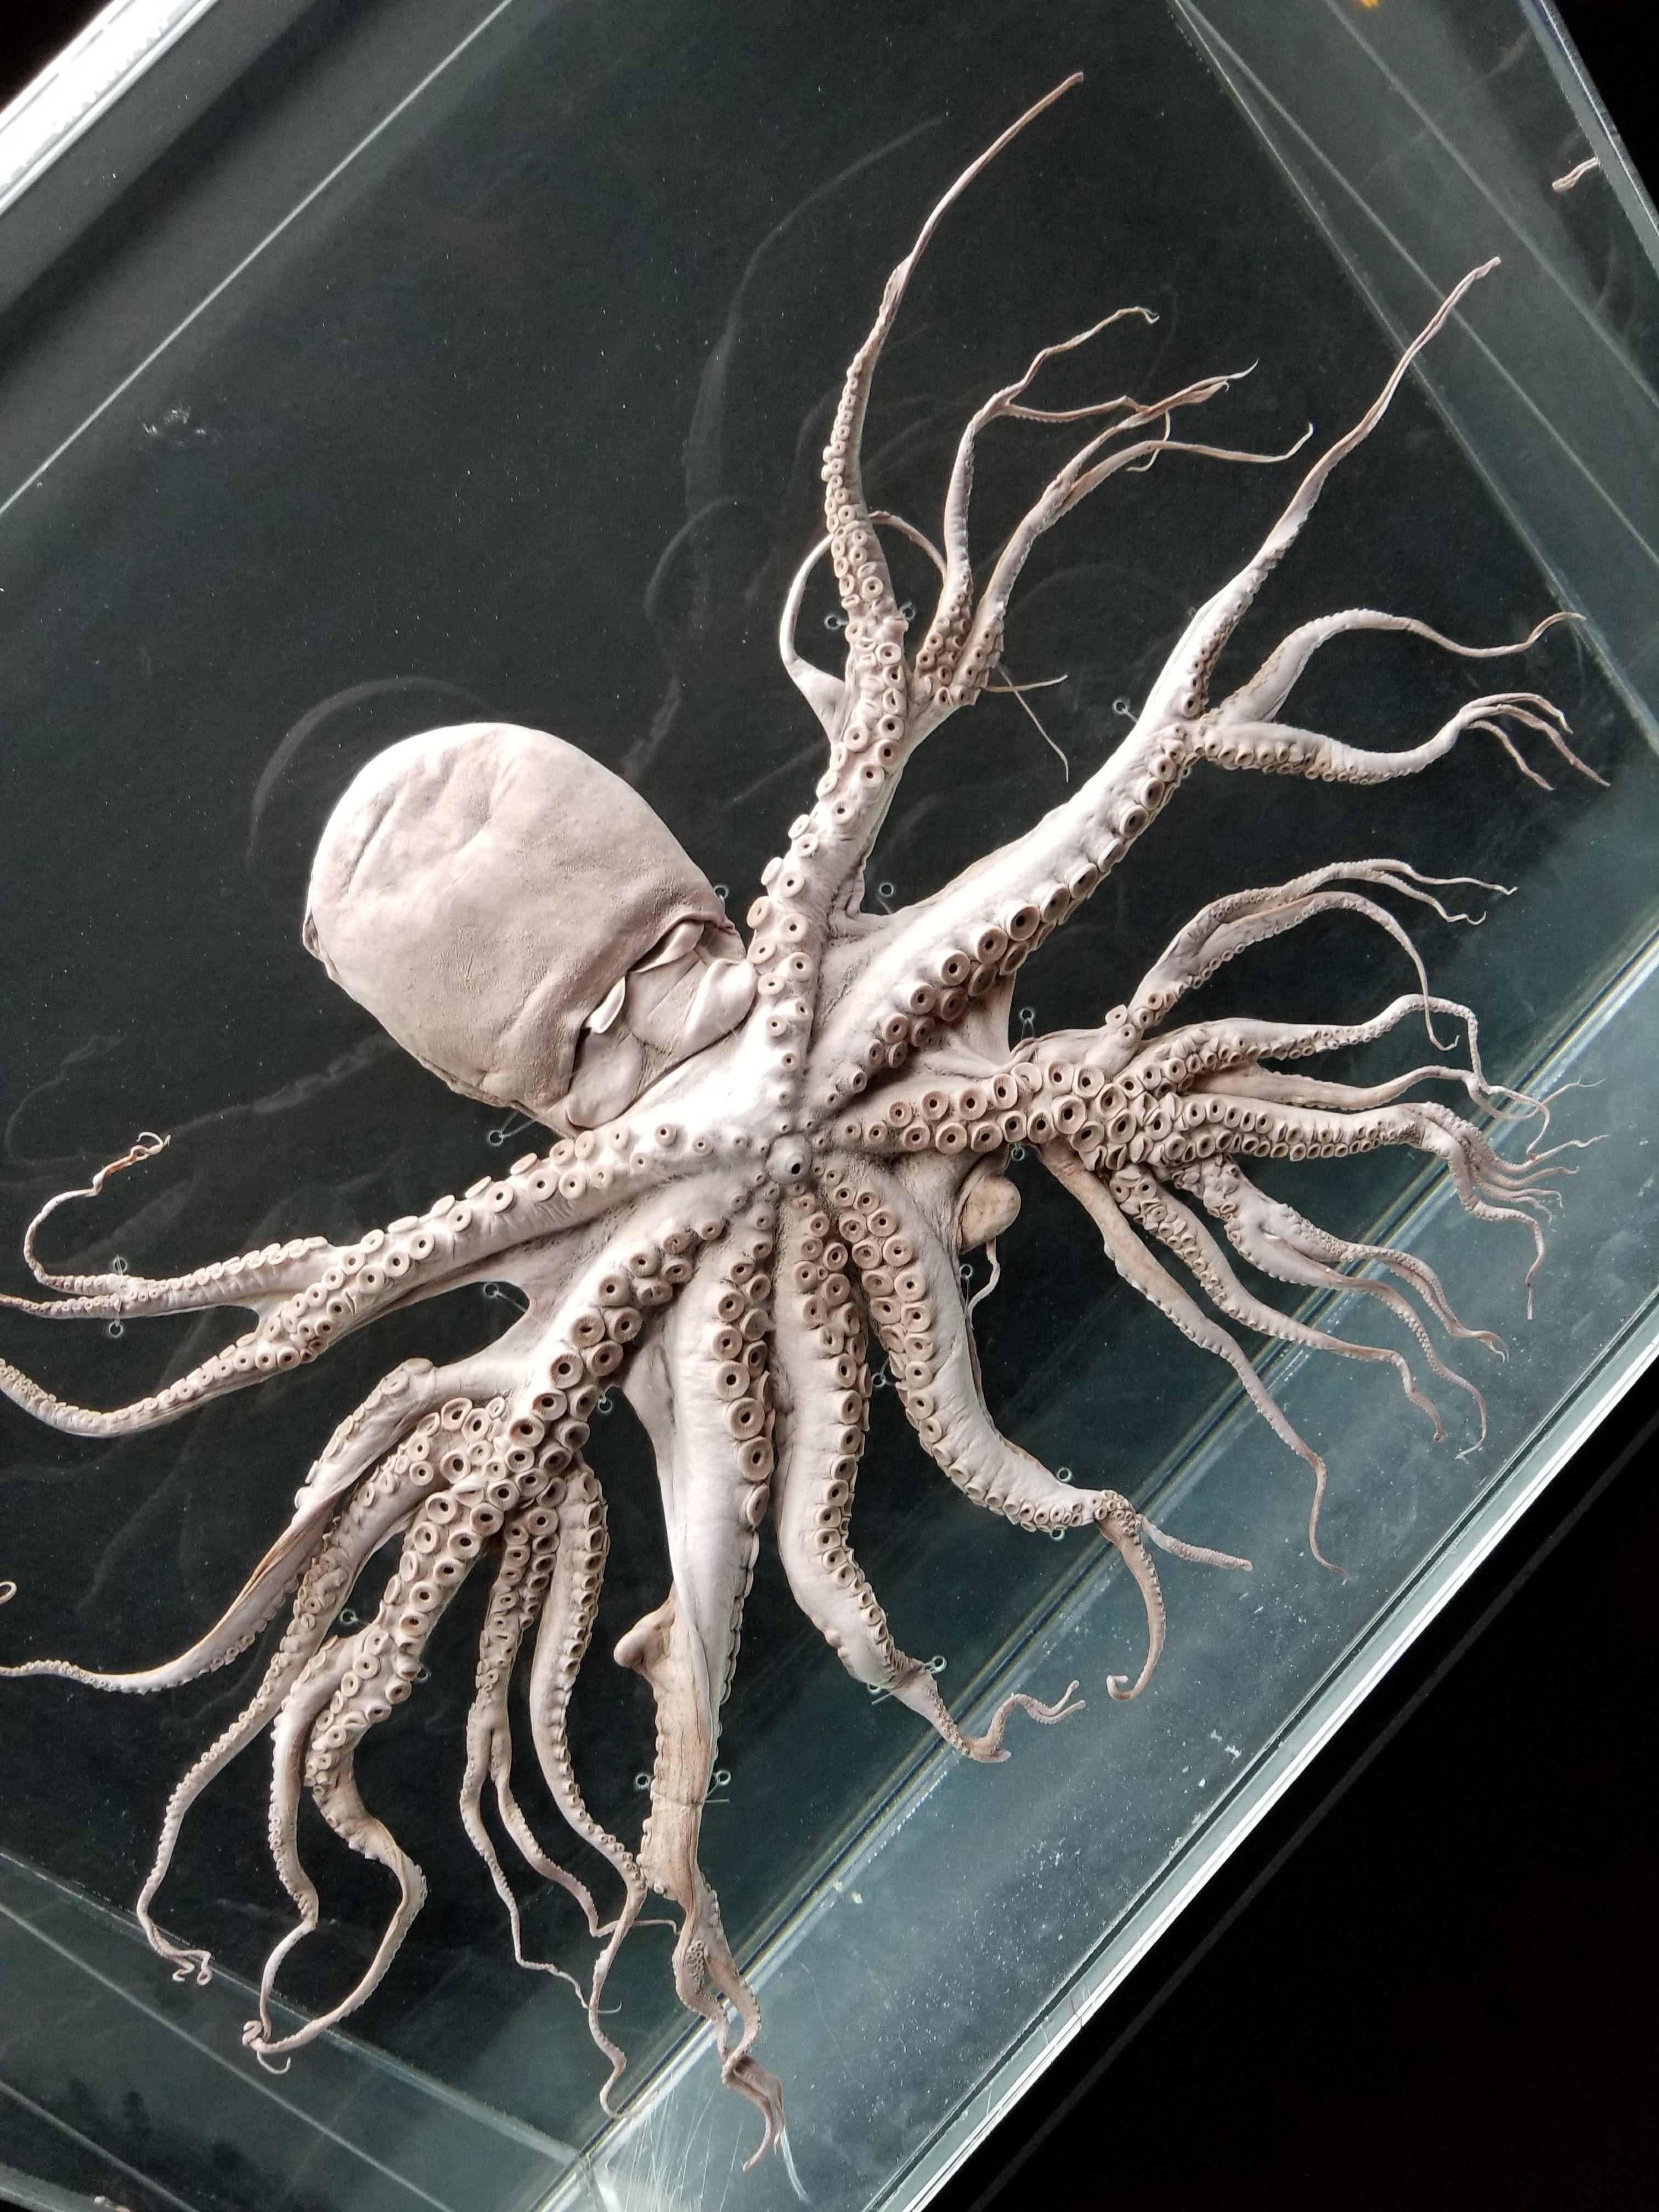 An octopus with split tentacles